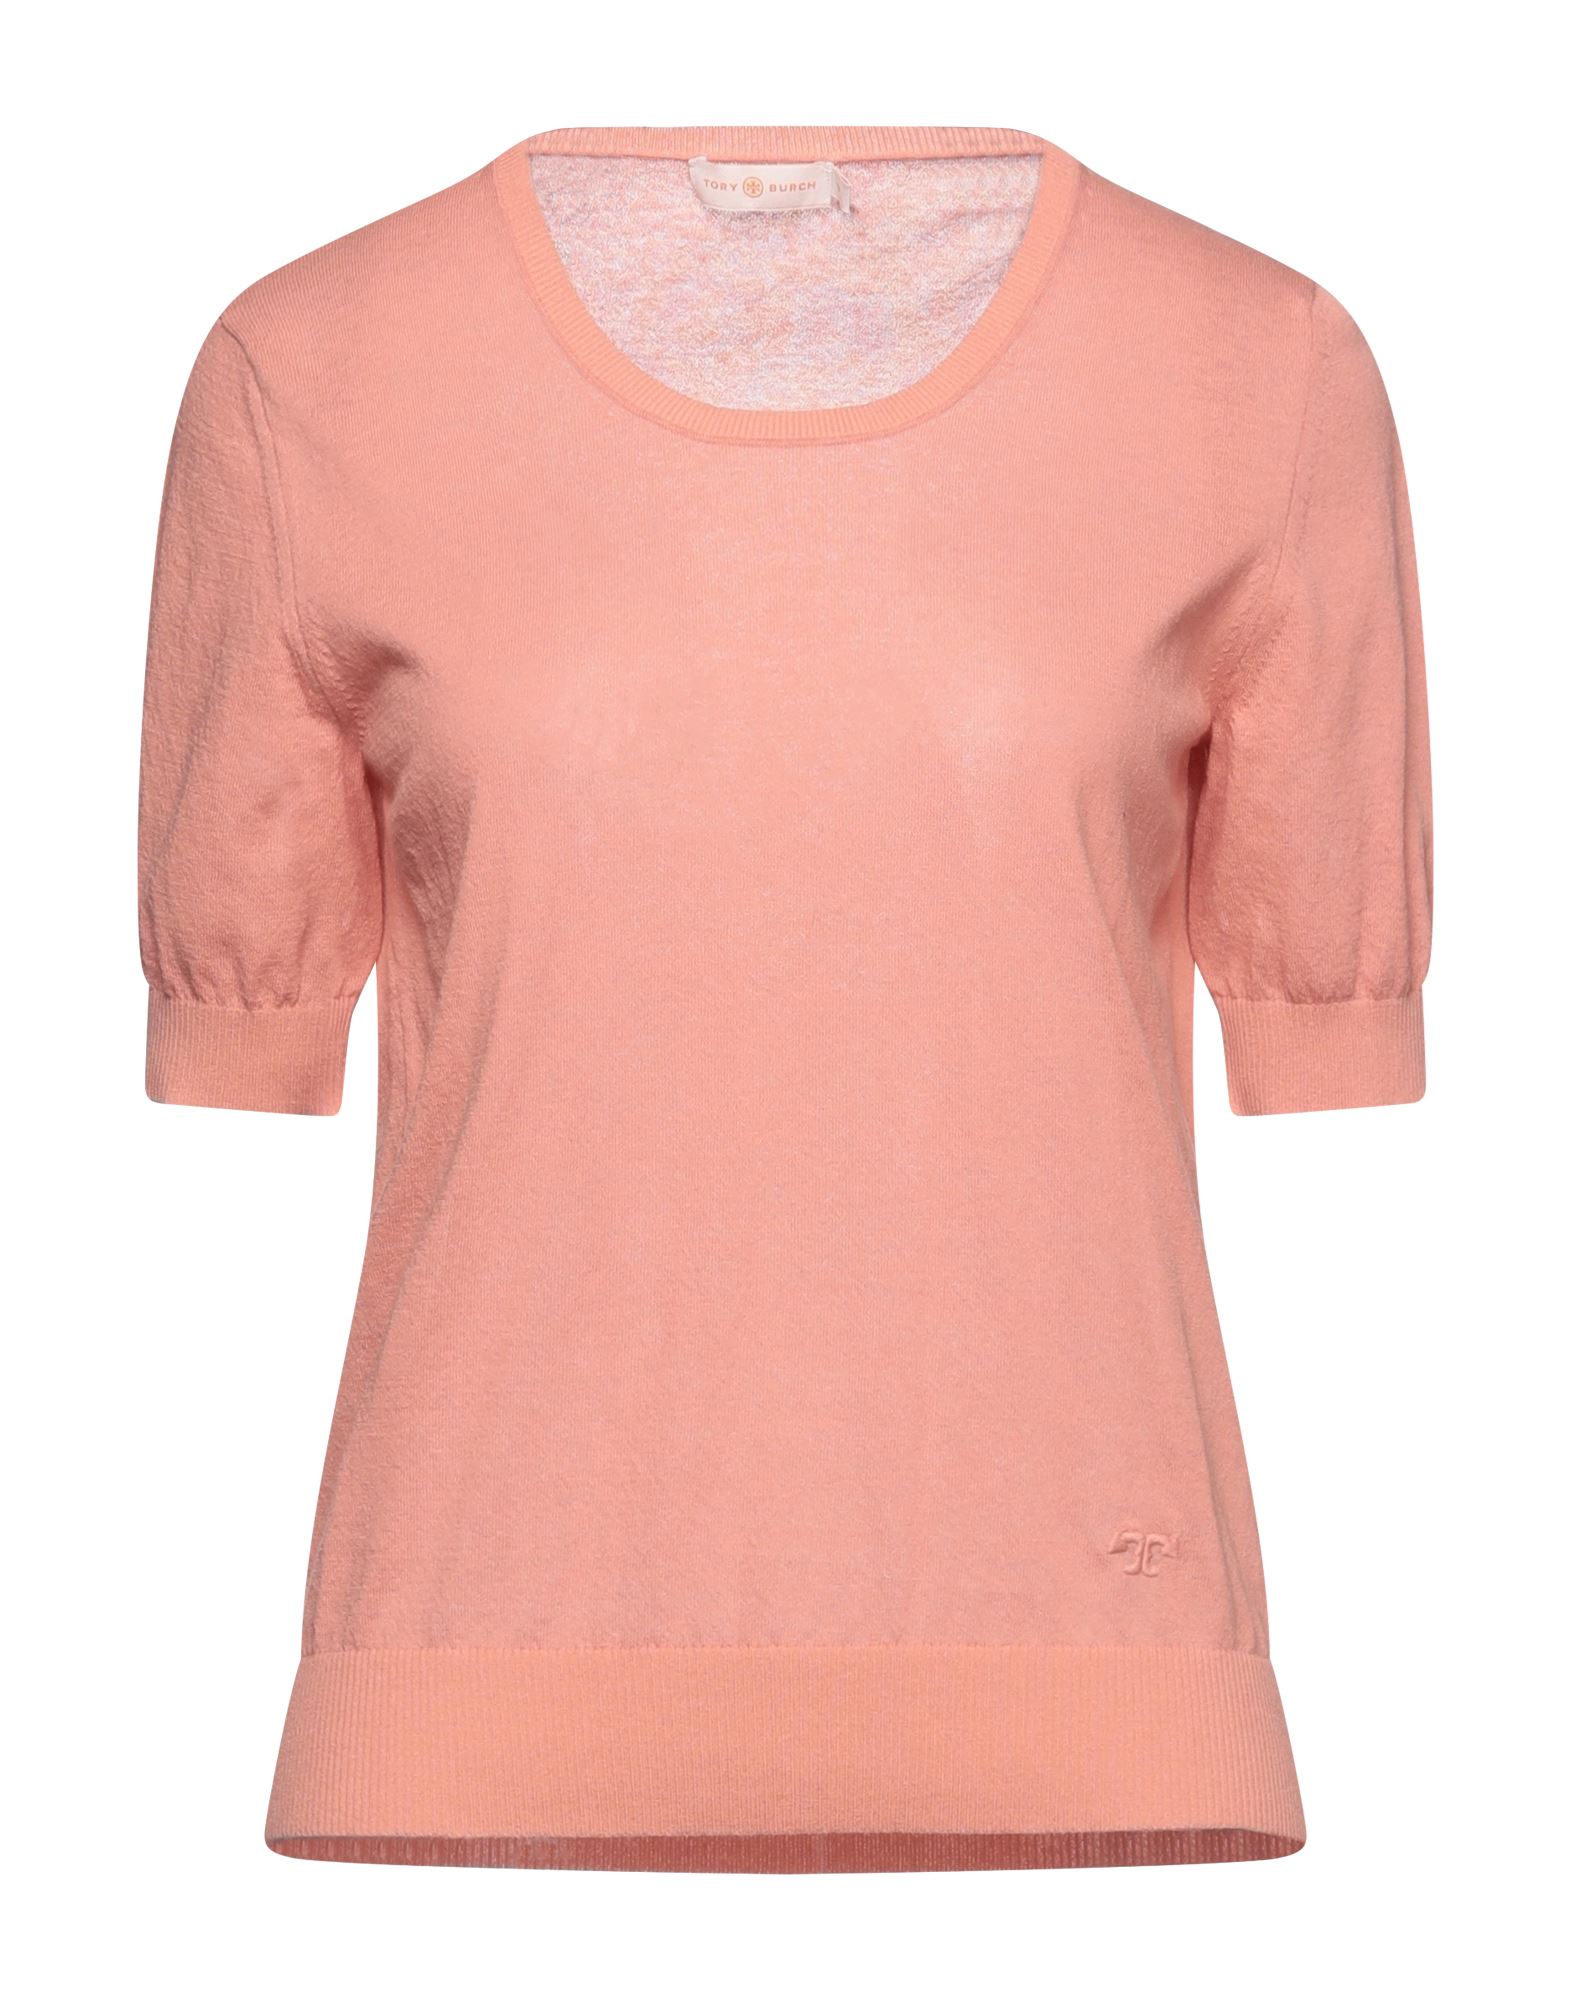 Tory Burch Sweaters In Pink